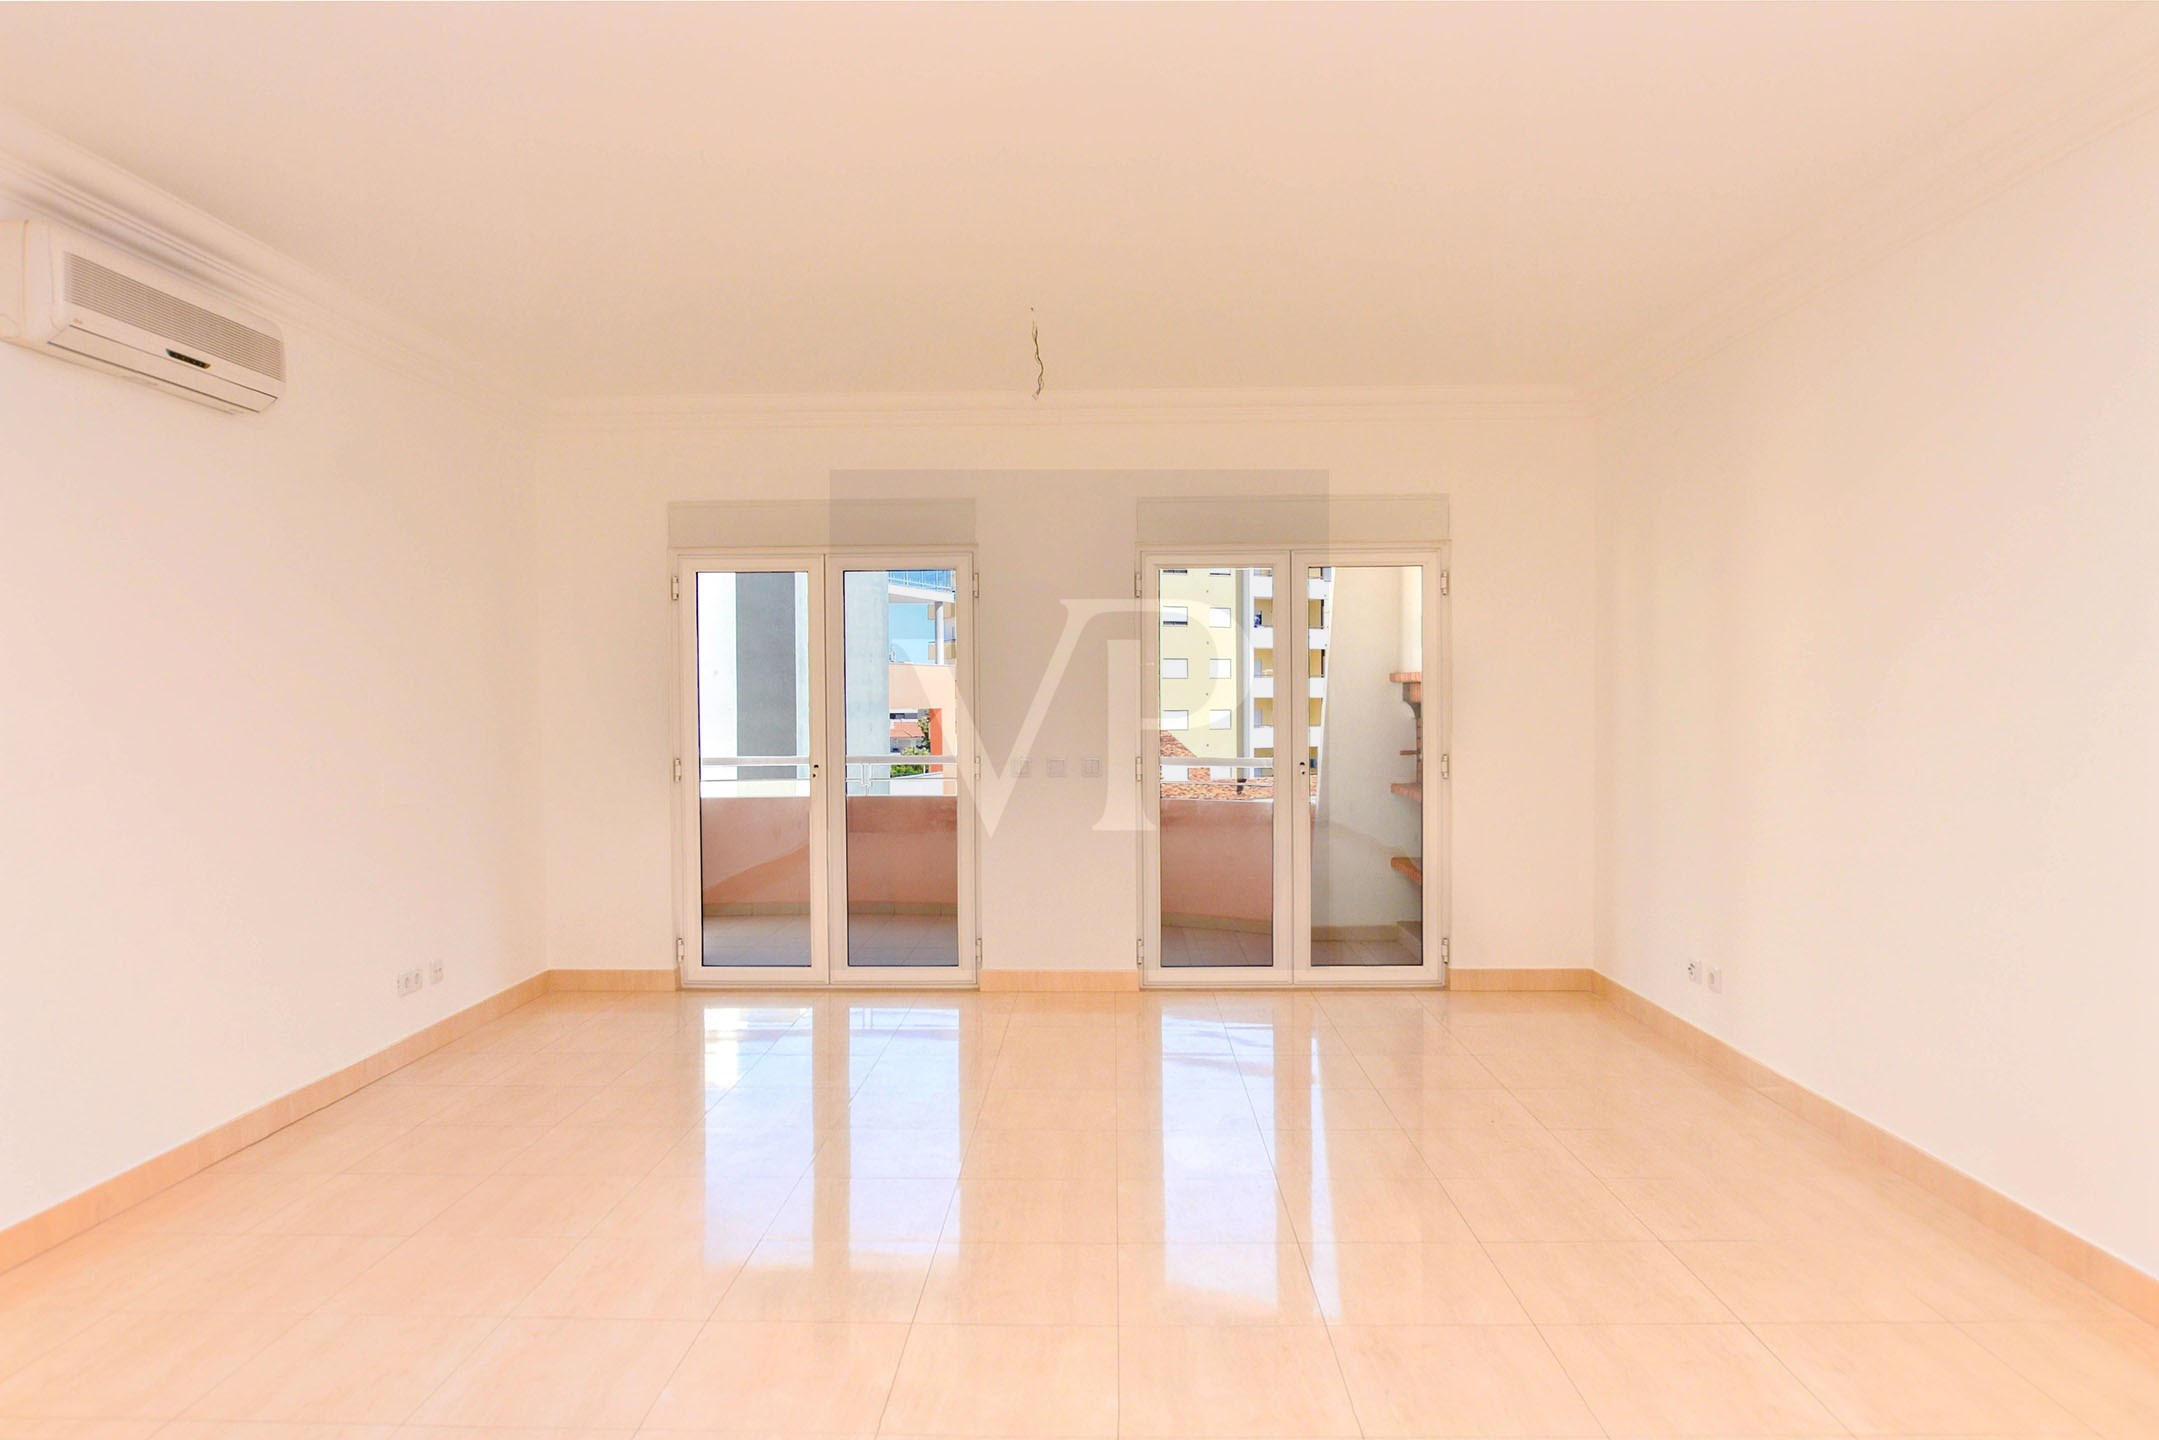 Fantastic 3 bedroom apartment, with two parking spaces and storage